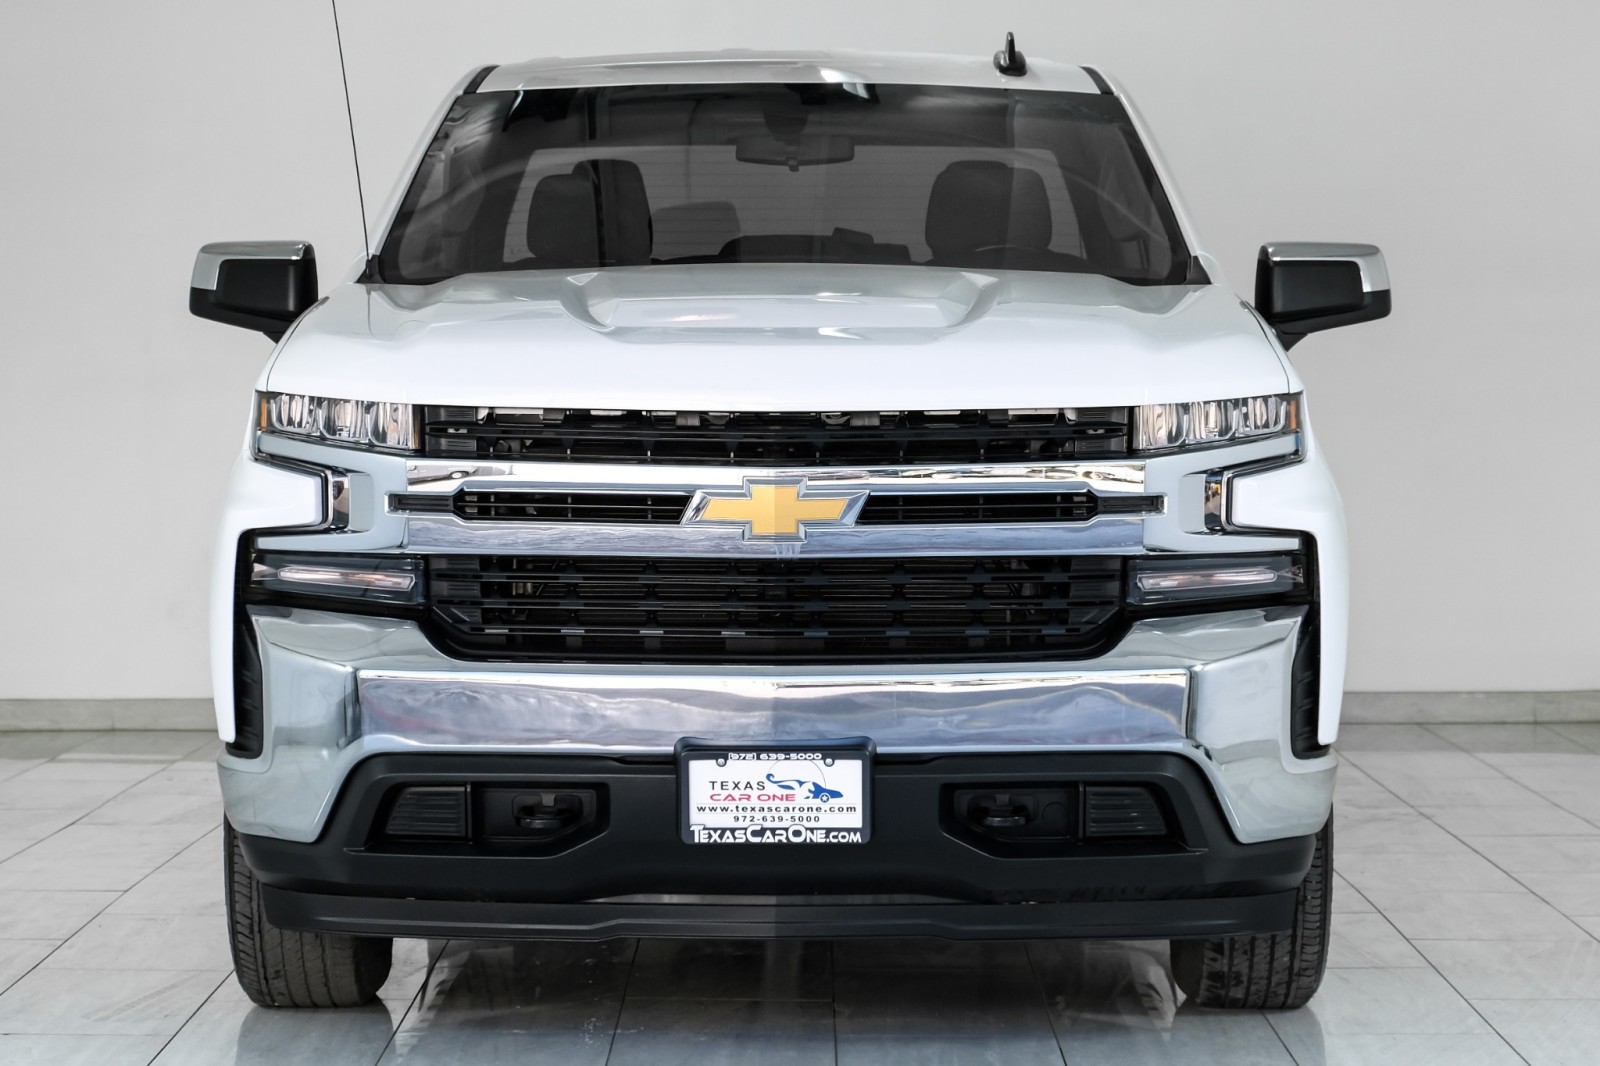 2019 Chevrolet Silverado 1500 LT DOUBLE CAB 4WD AUTOMATIC HEATED SEATS REAR CAME 5